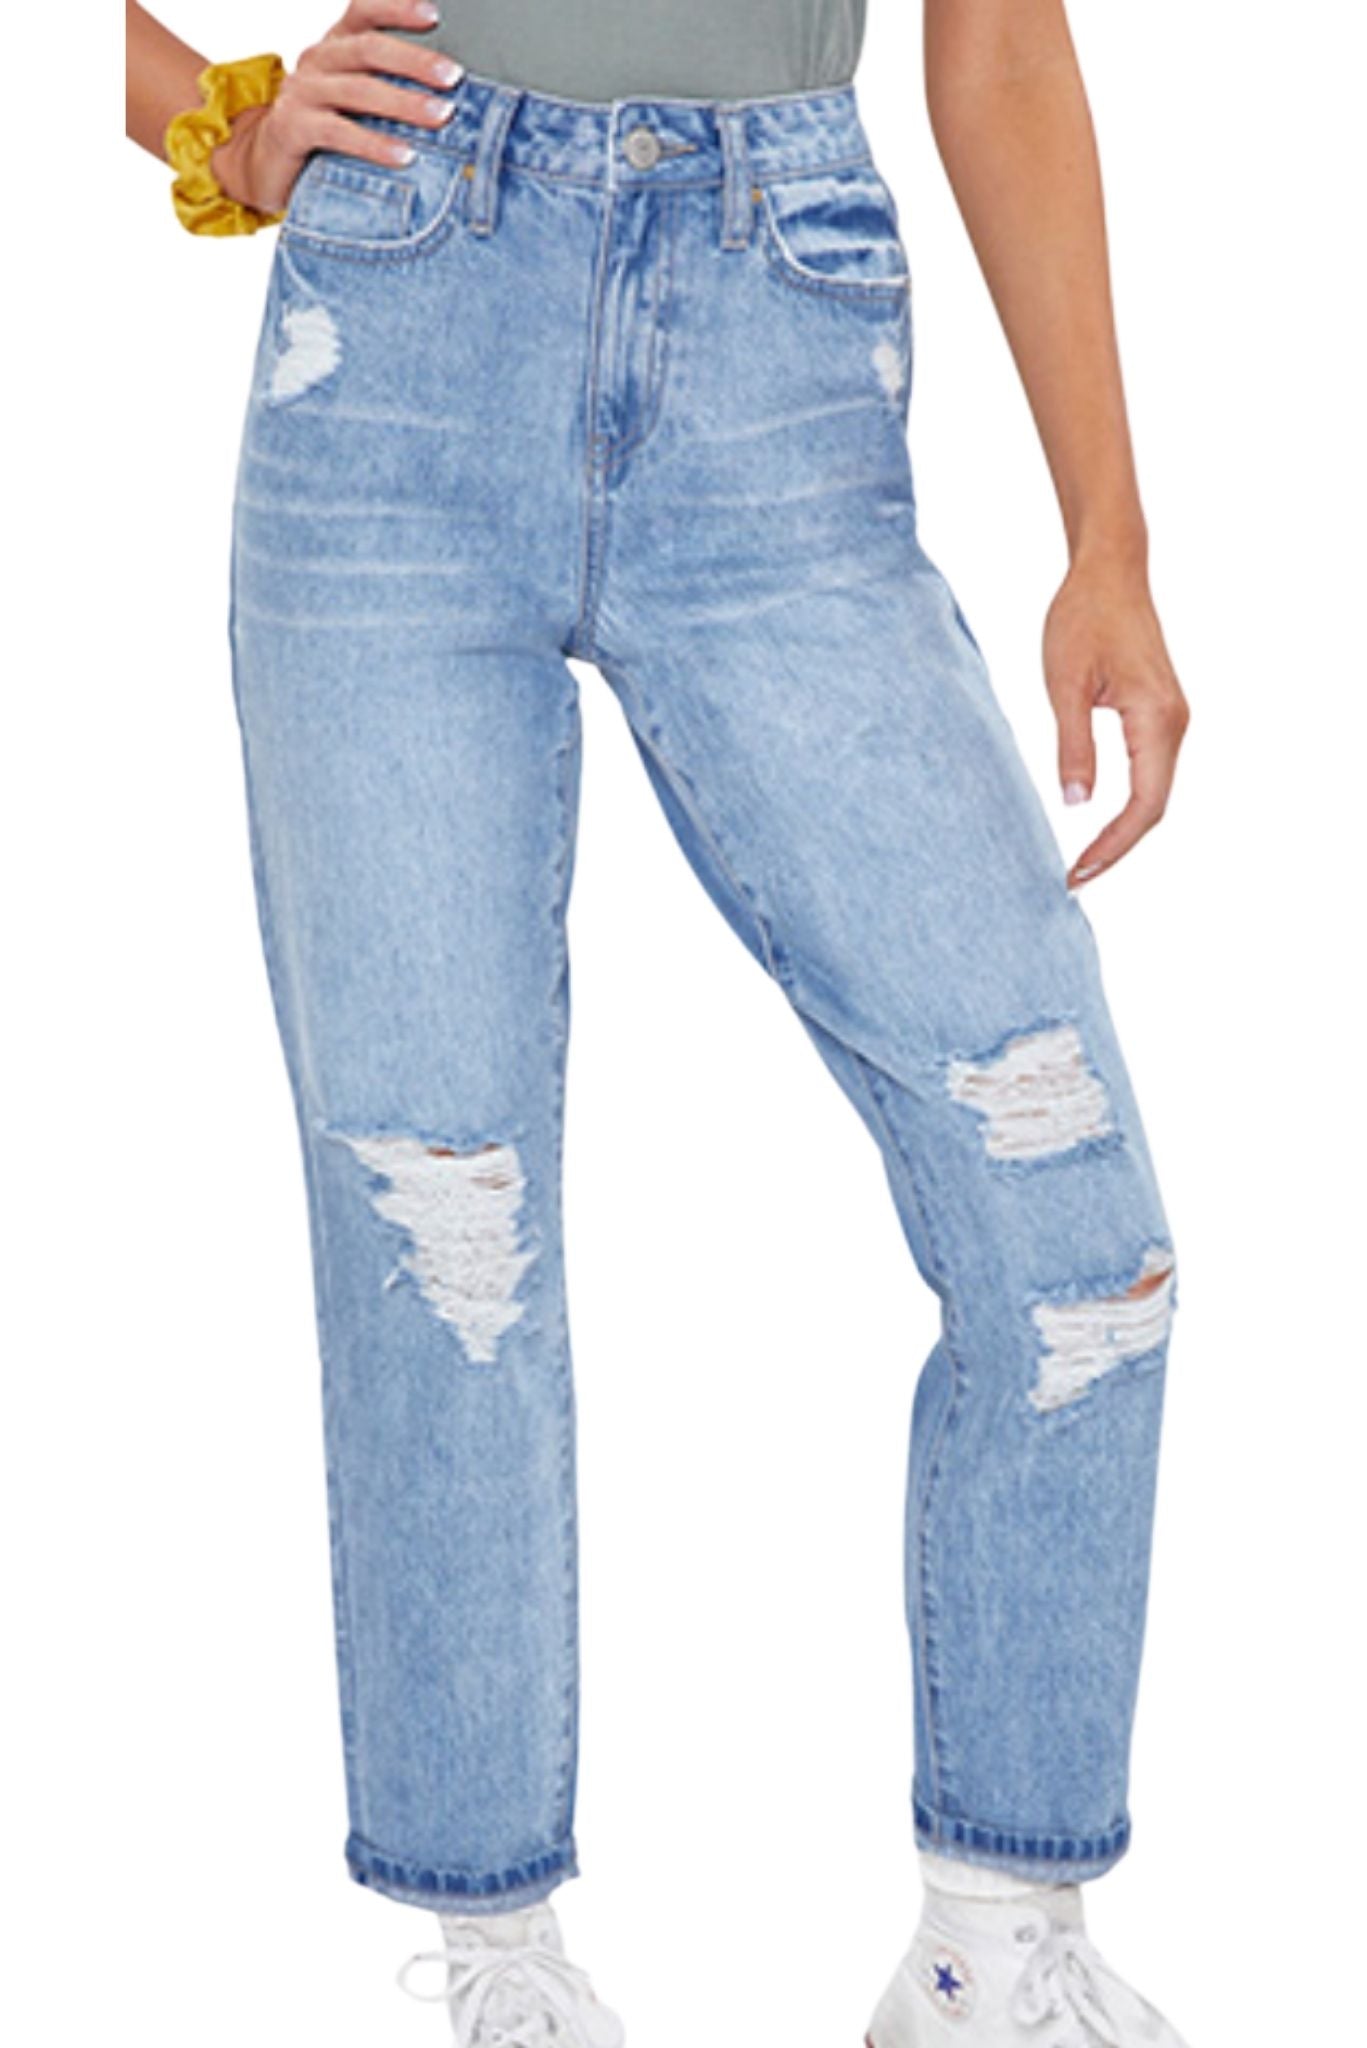 Load image into Gallery viewer, Light Wash Distressed Mom Jeans
